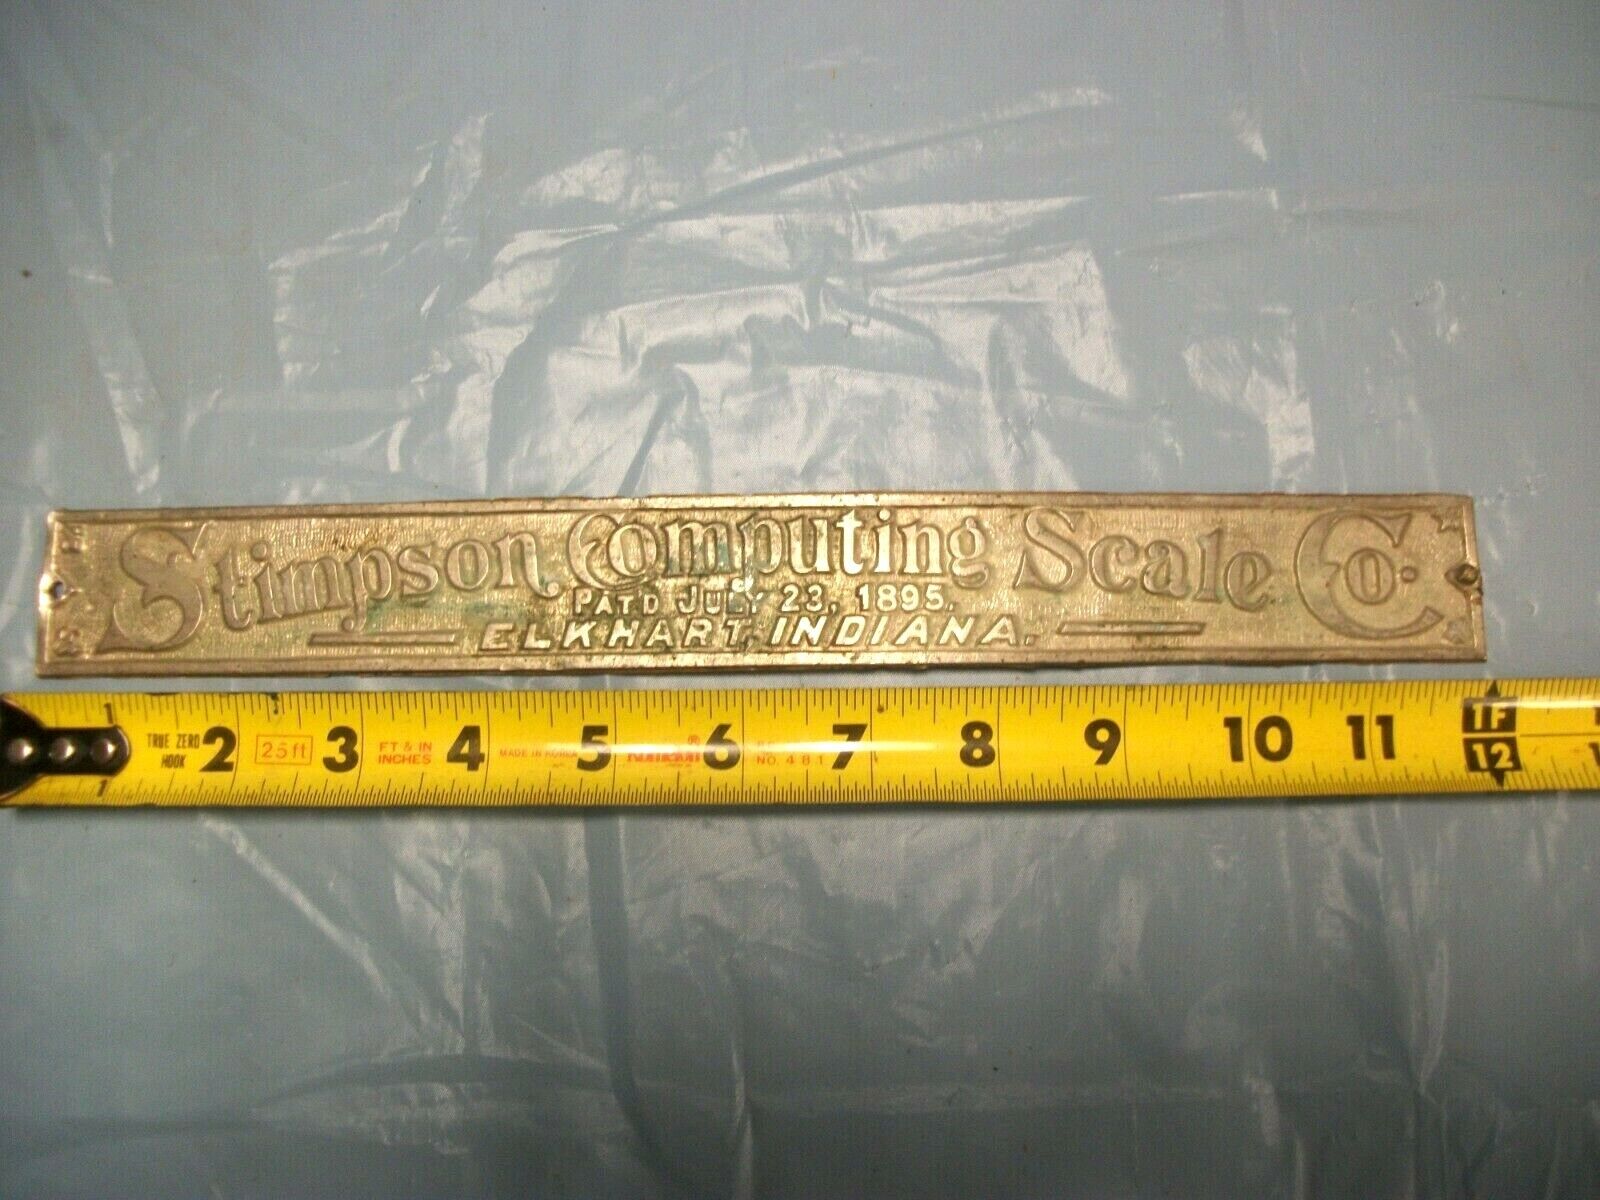 ANTIQUE STIMPSON COMPUTING SCALE CO. SIGN RARE BRASS ADVERTISING NAMEPLATE USA 